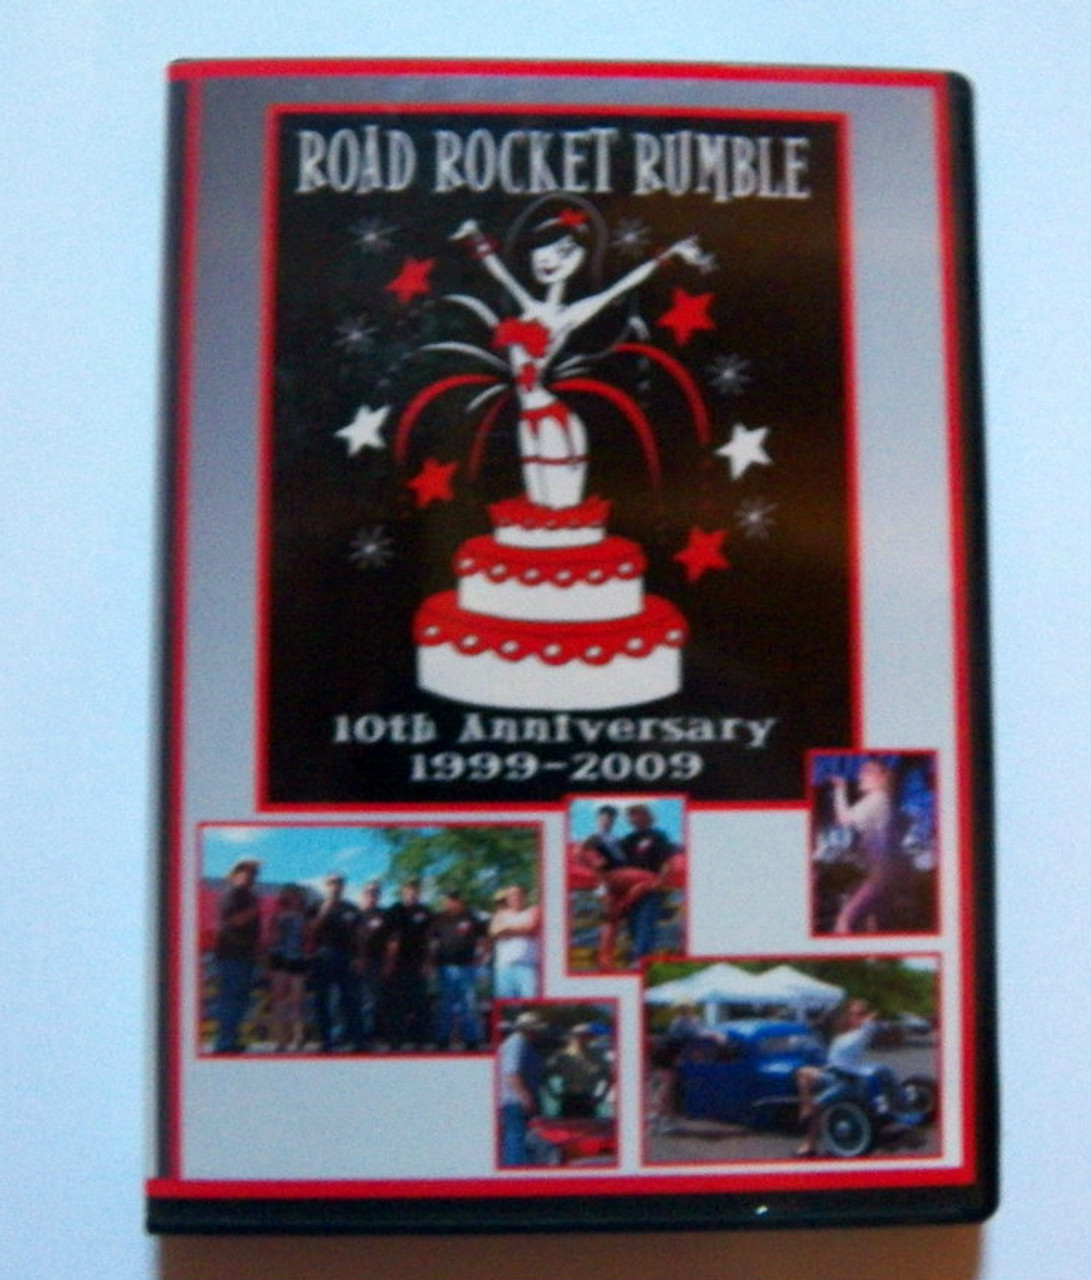 Road Rocket Rumble 10th Anniversary DVD  (used)